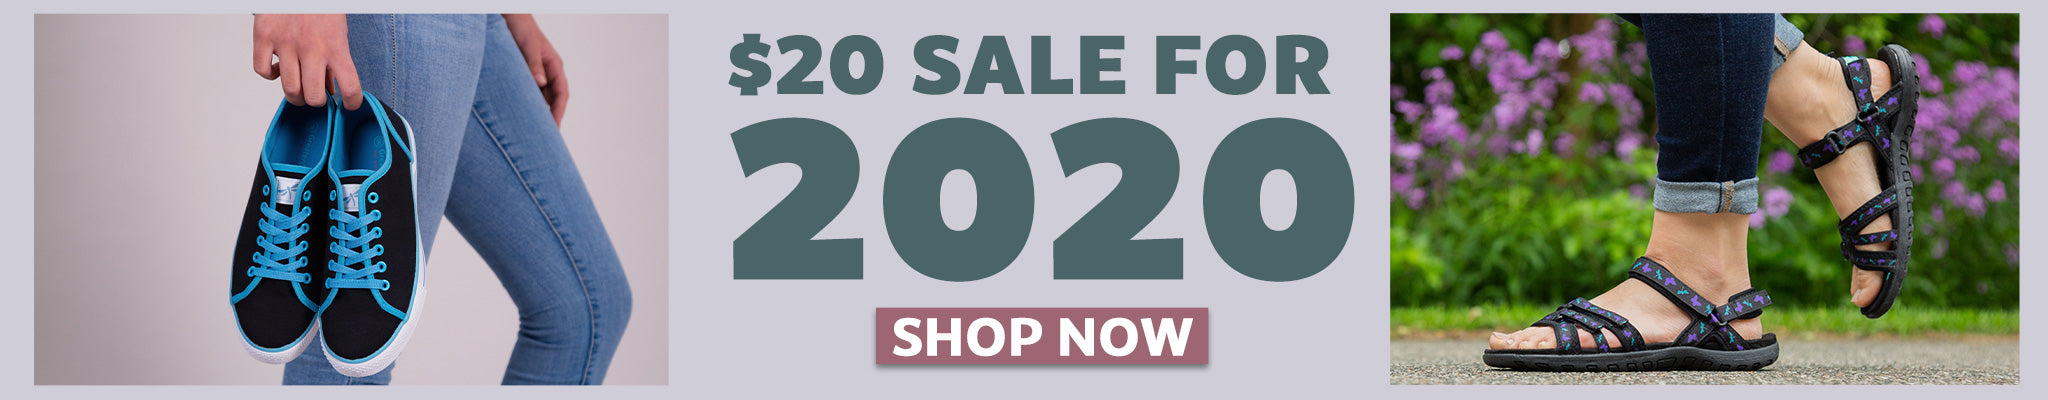 $20 Items for 2020